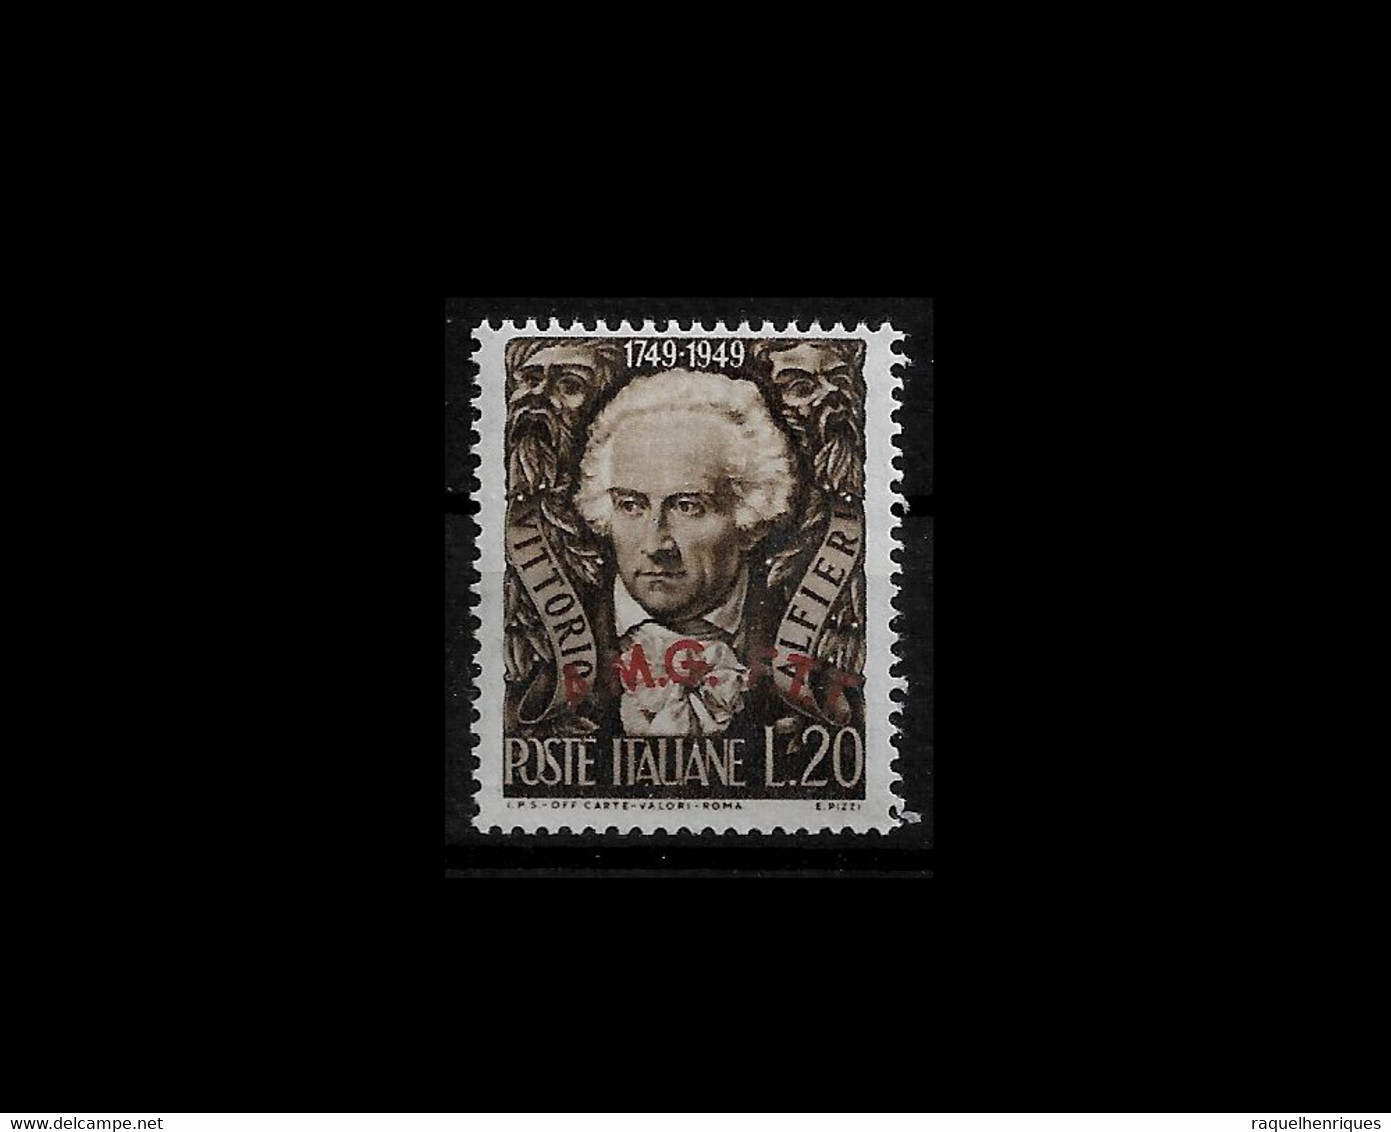 ITALY STAMP - TRIESTE ZONE A - 1949 The 200th An.Birth Of Alfierii - AMG FTT MH (BA5#63) - Egeo (Amministrazione Autonoma)